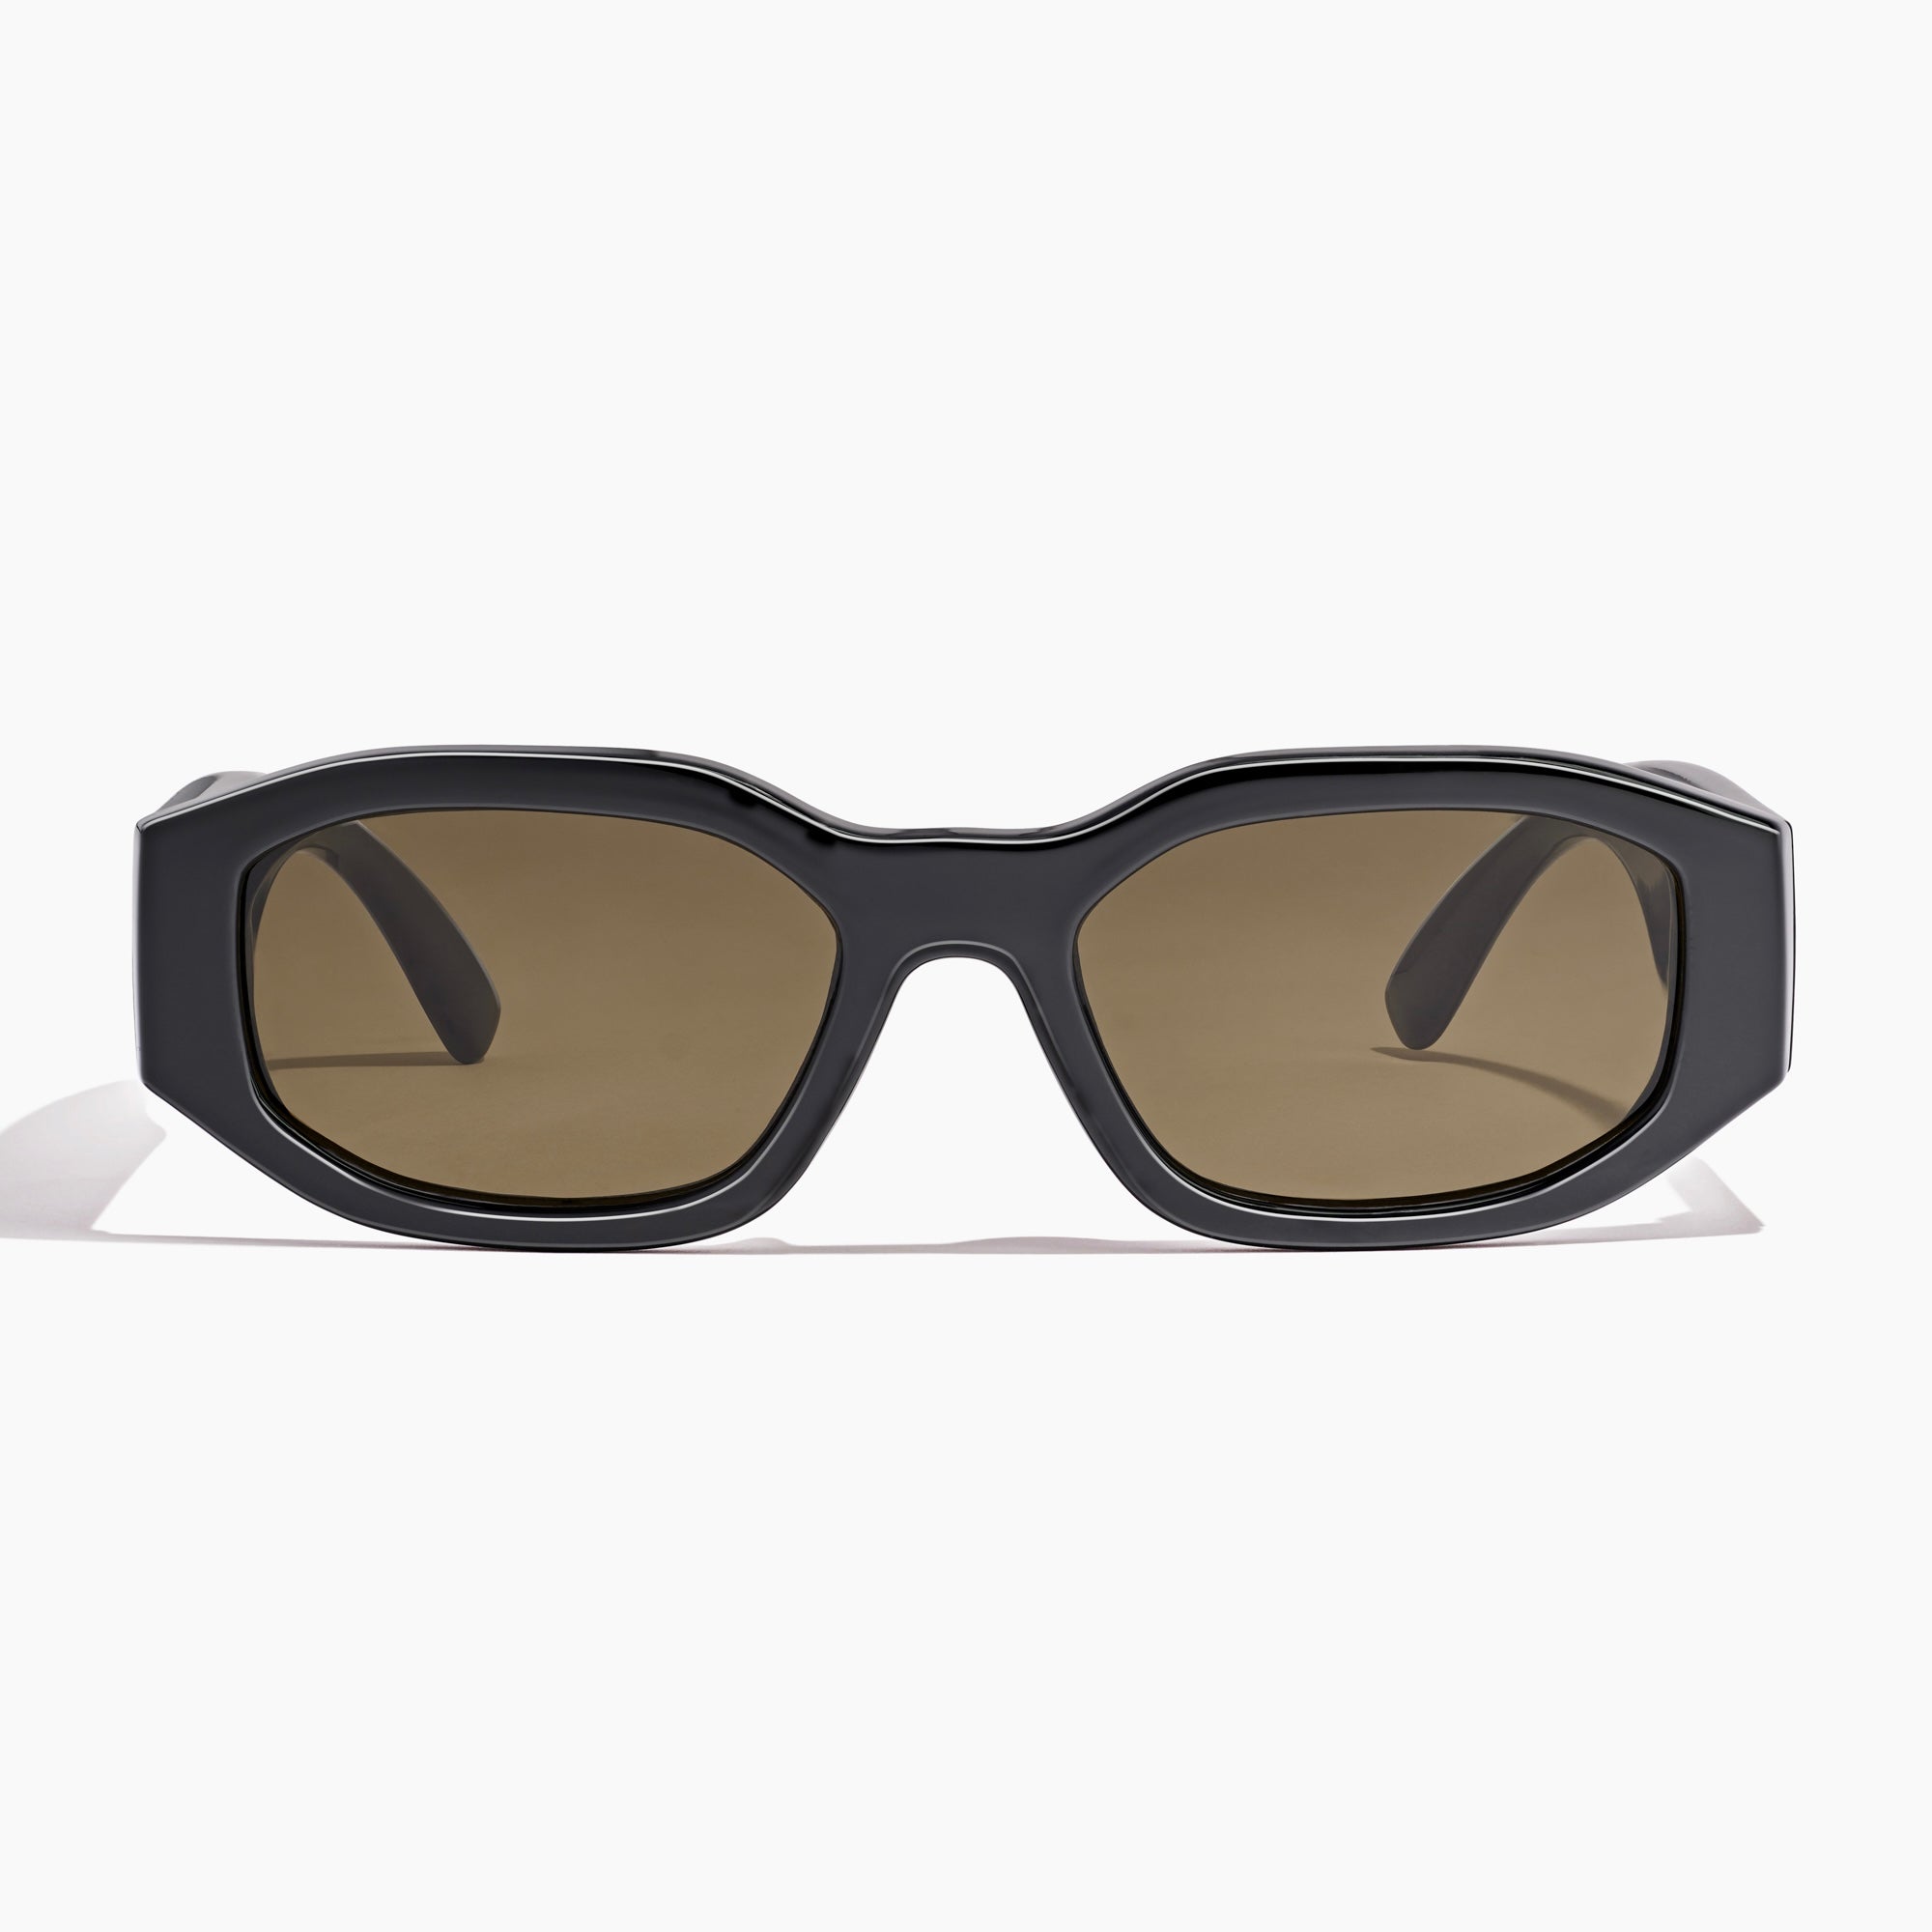 East Side Sunglasses in black and sepia - Szade - State Of Flux